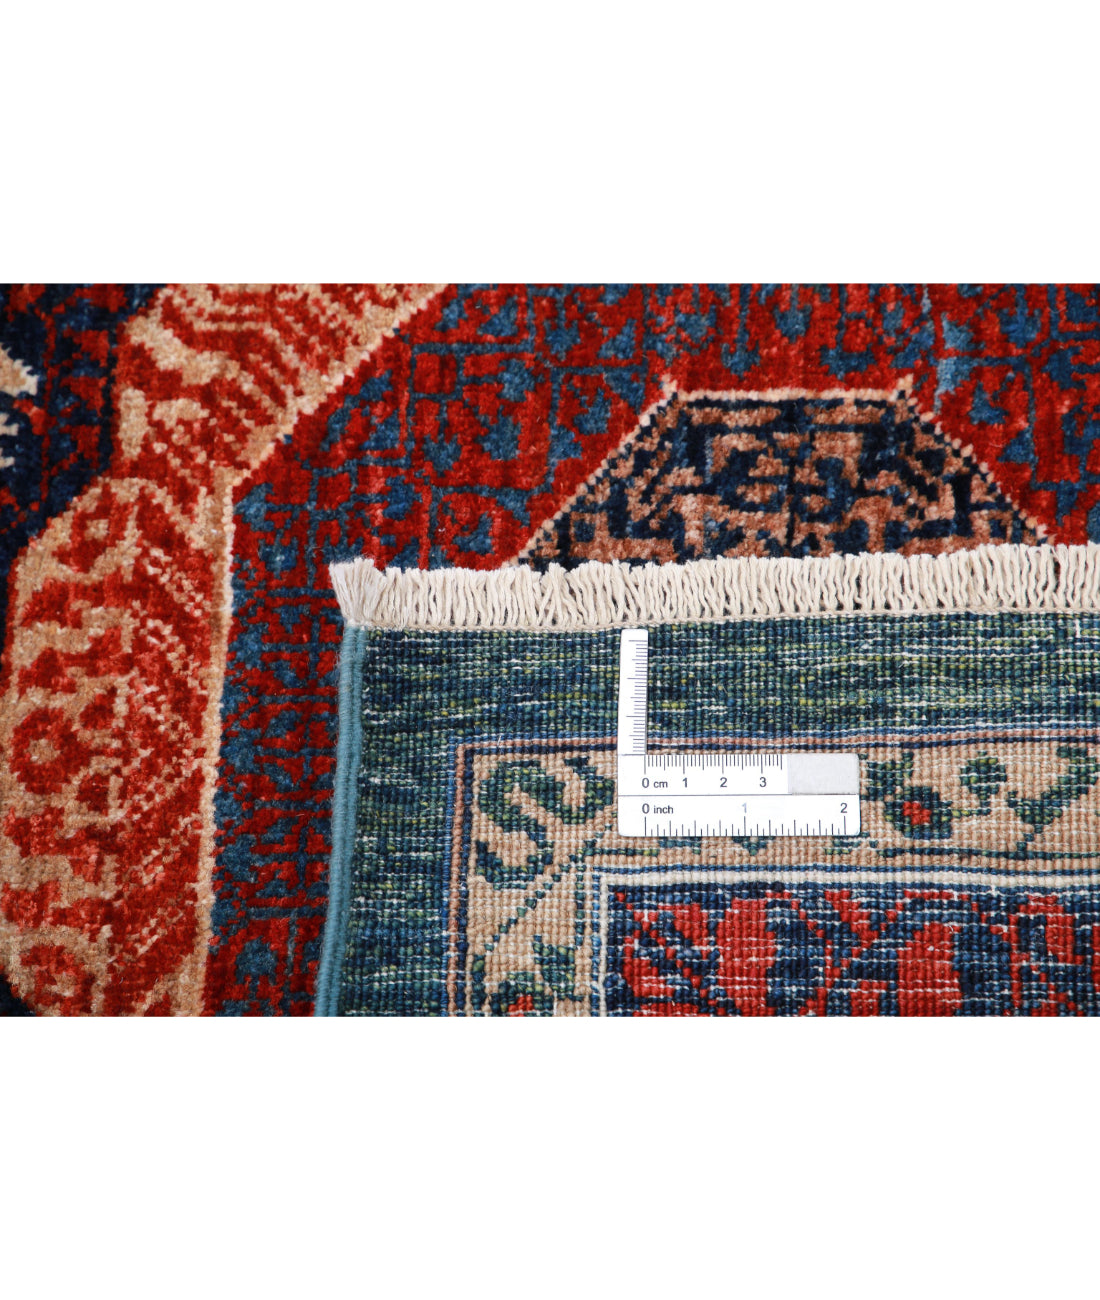 Mamluk 10'2'' X 13'0'' Hand-Knotted Wool Rug 10'2'' x 13'0'' (305 X 390) / Green / Red